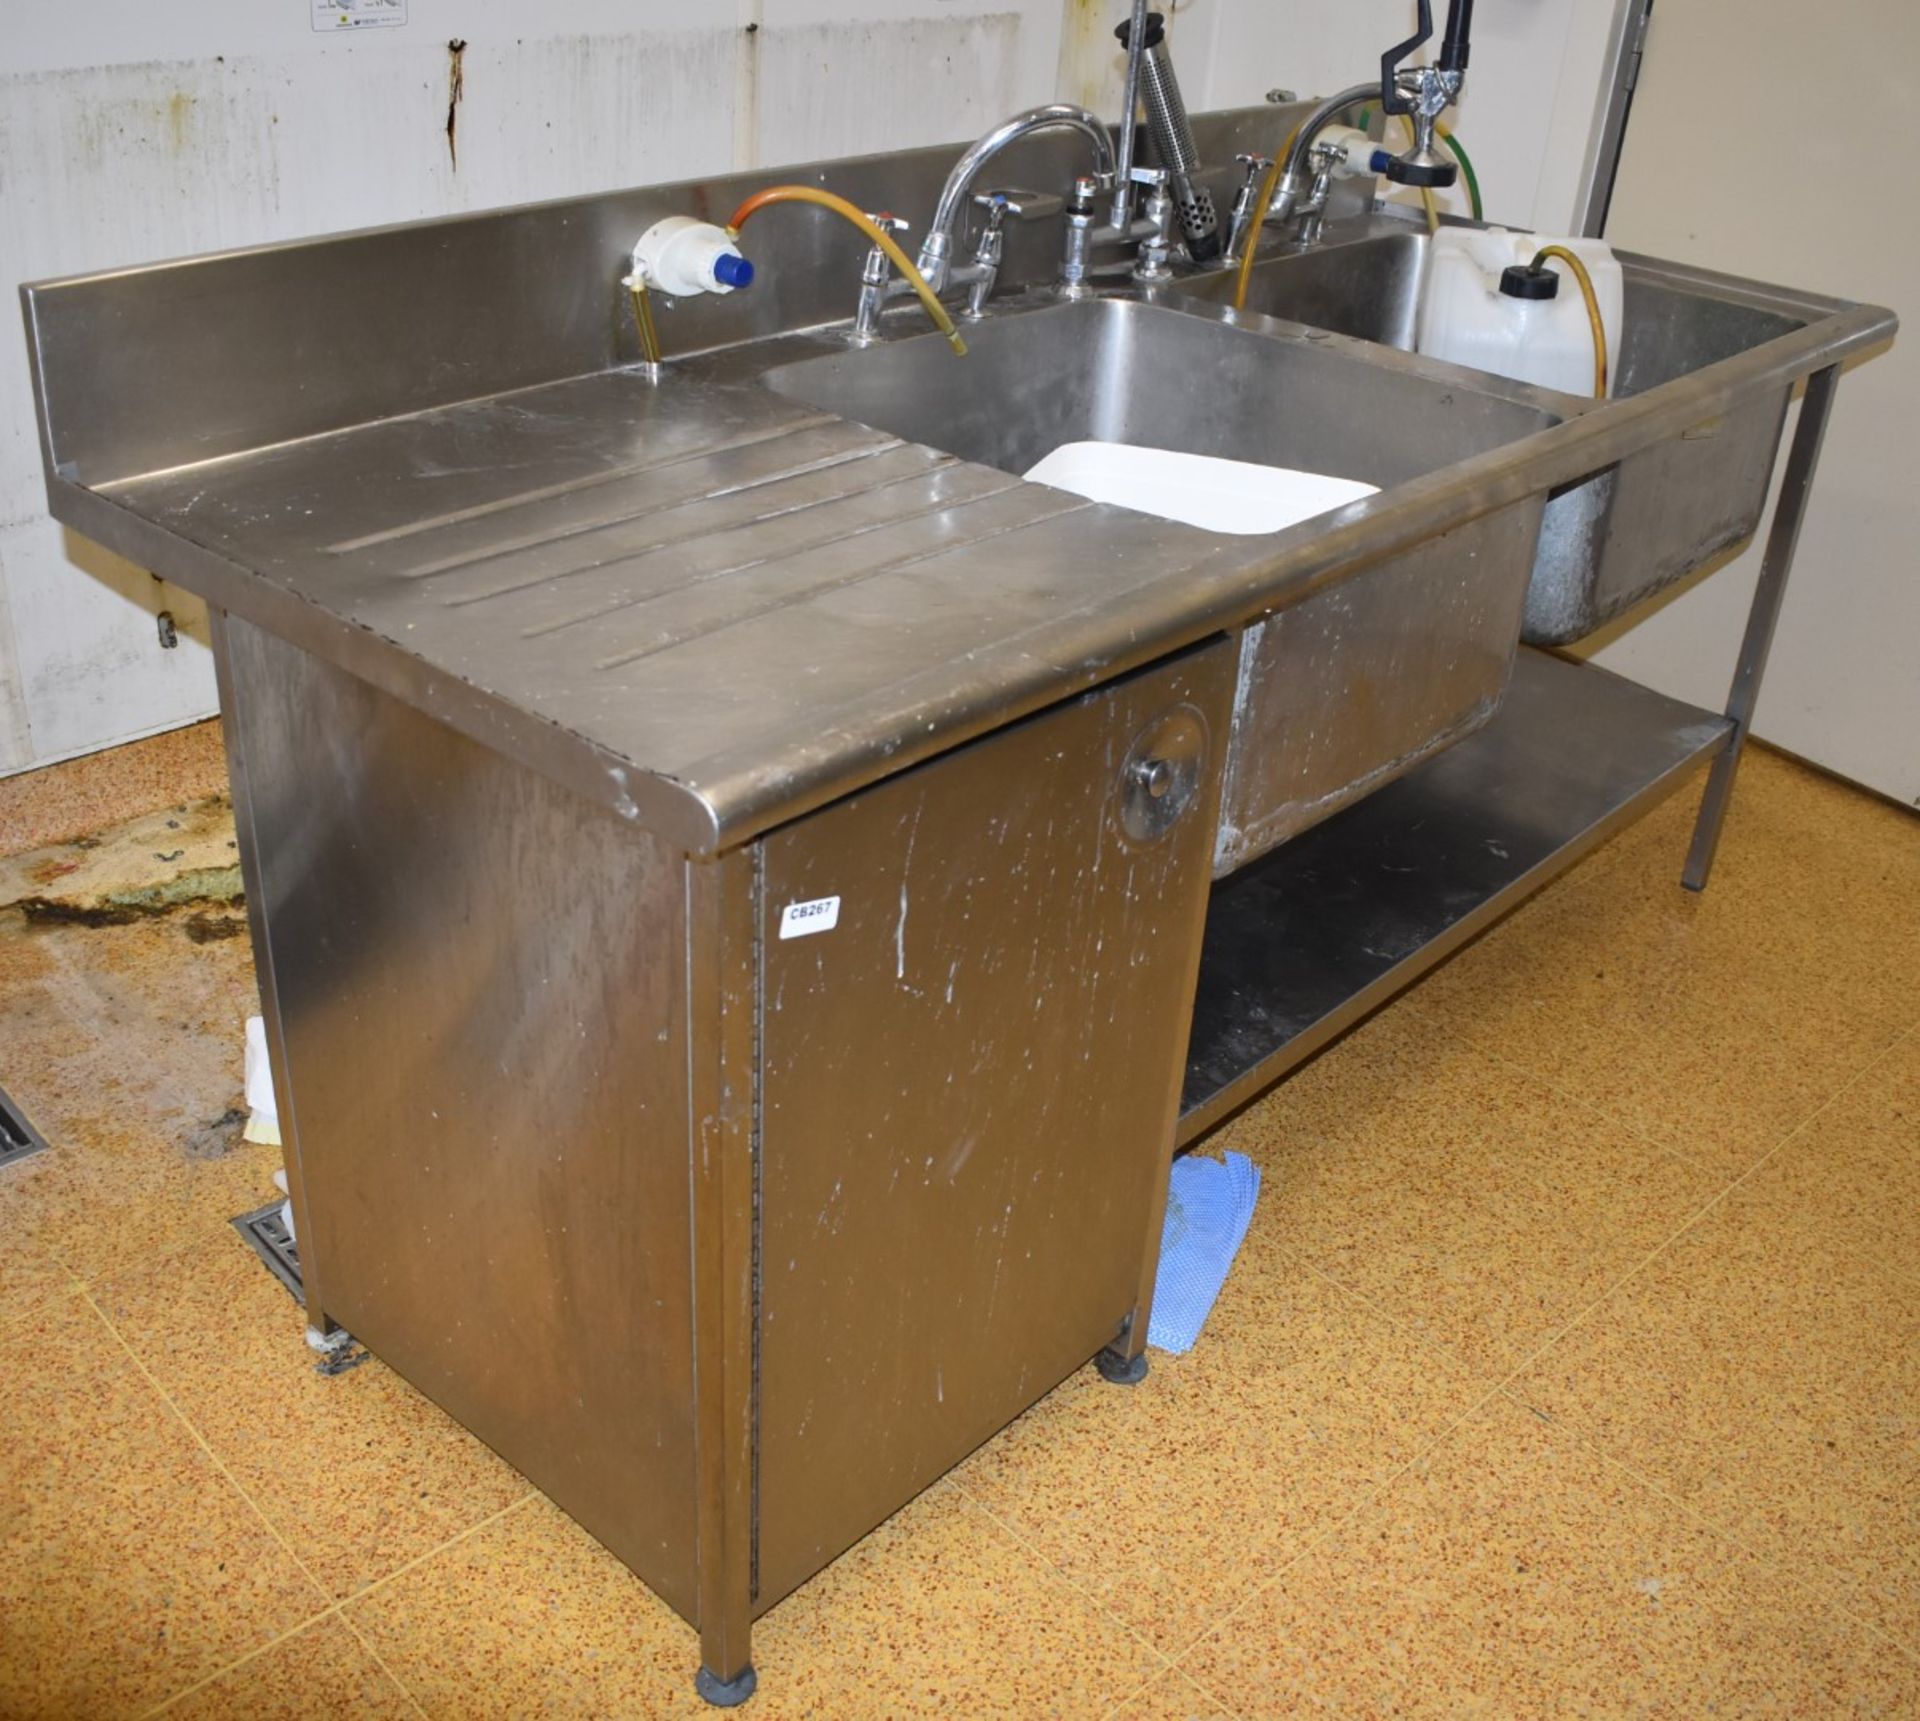 1 x Stainless Steel Twin Sink Basin With Two Large Sink Basins, Drainer, Cupboard, Undershelf,